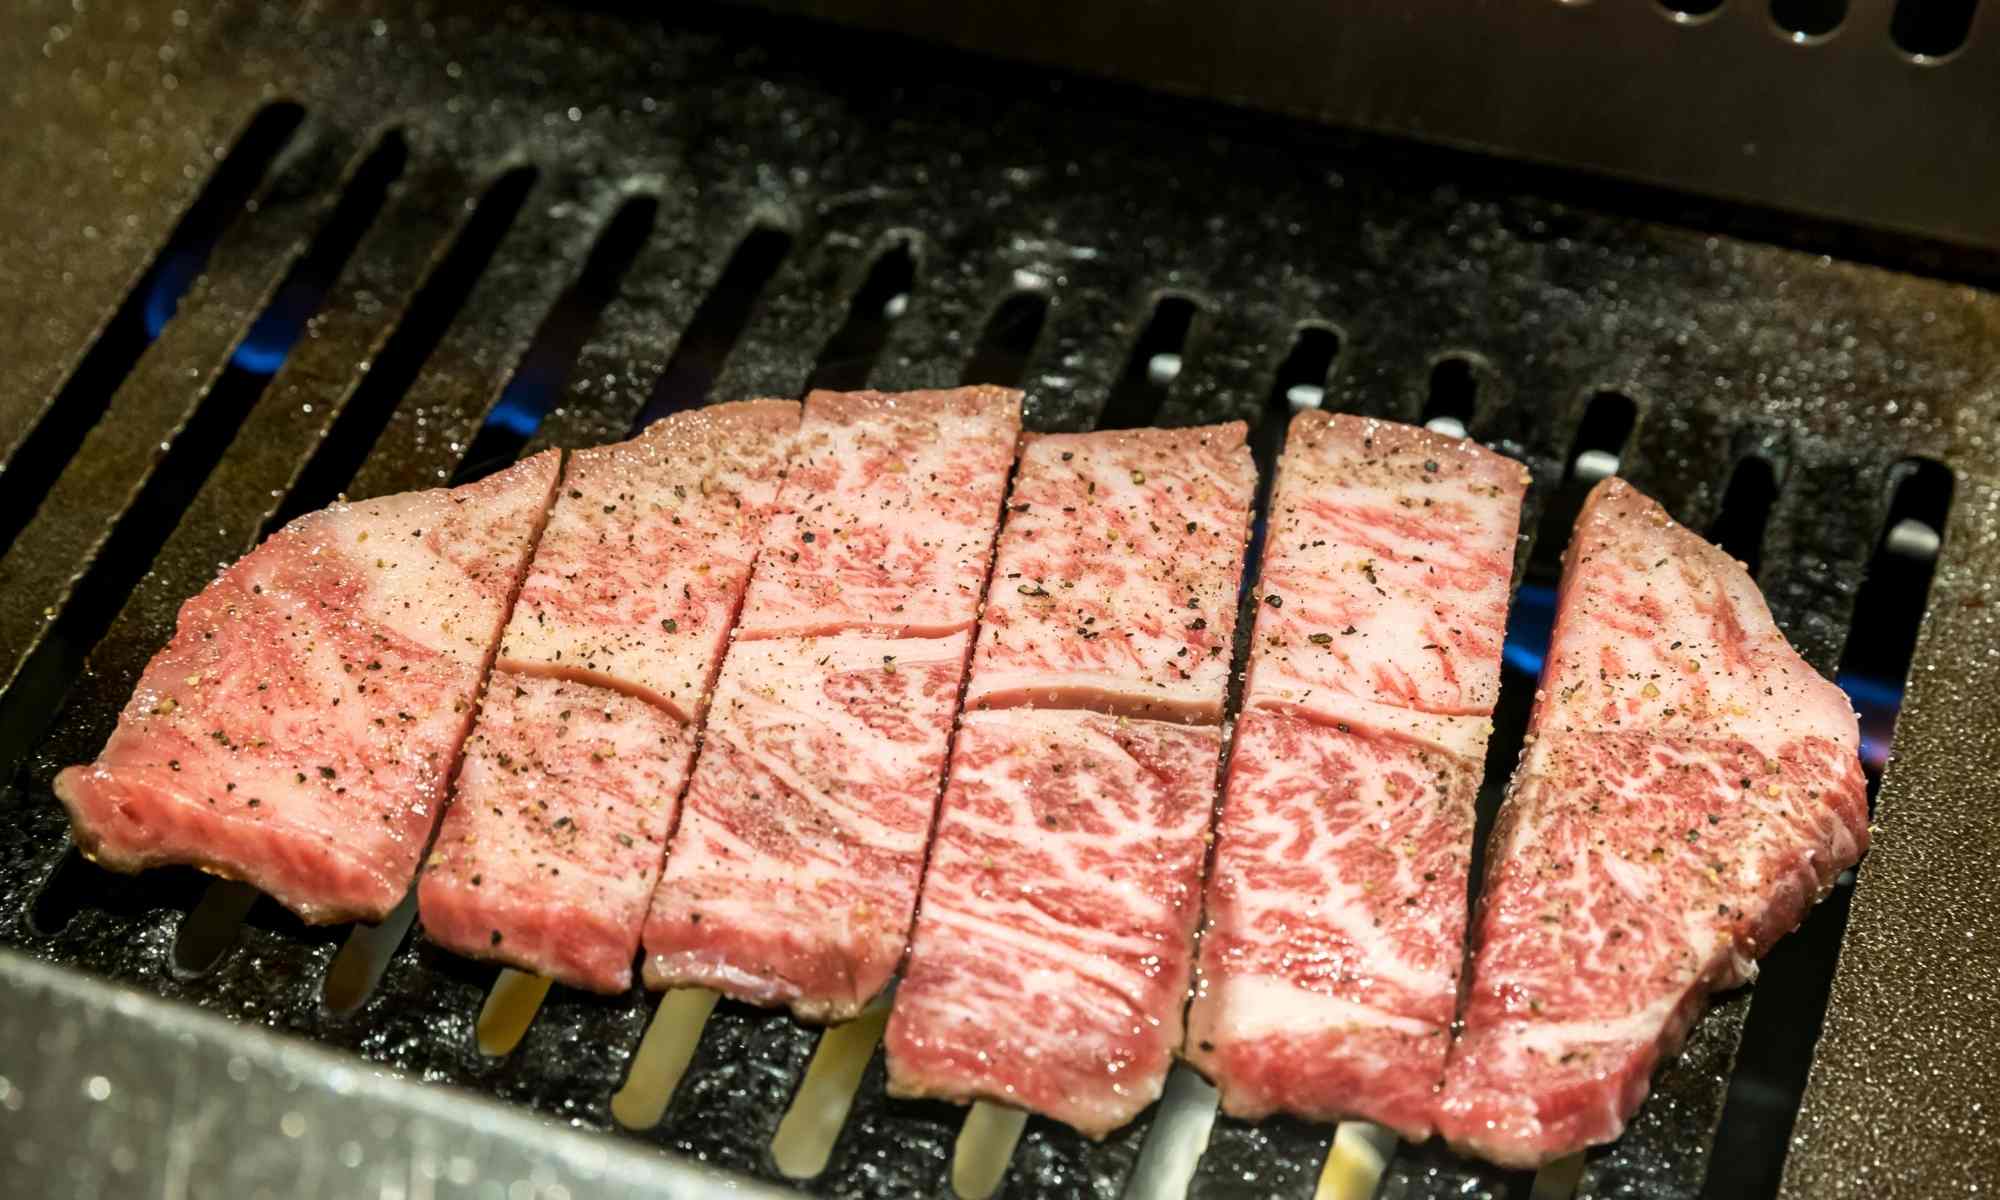 La Boucherie's Wagyu beef will literally melt in your mouth